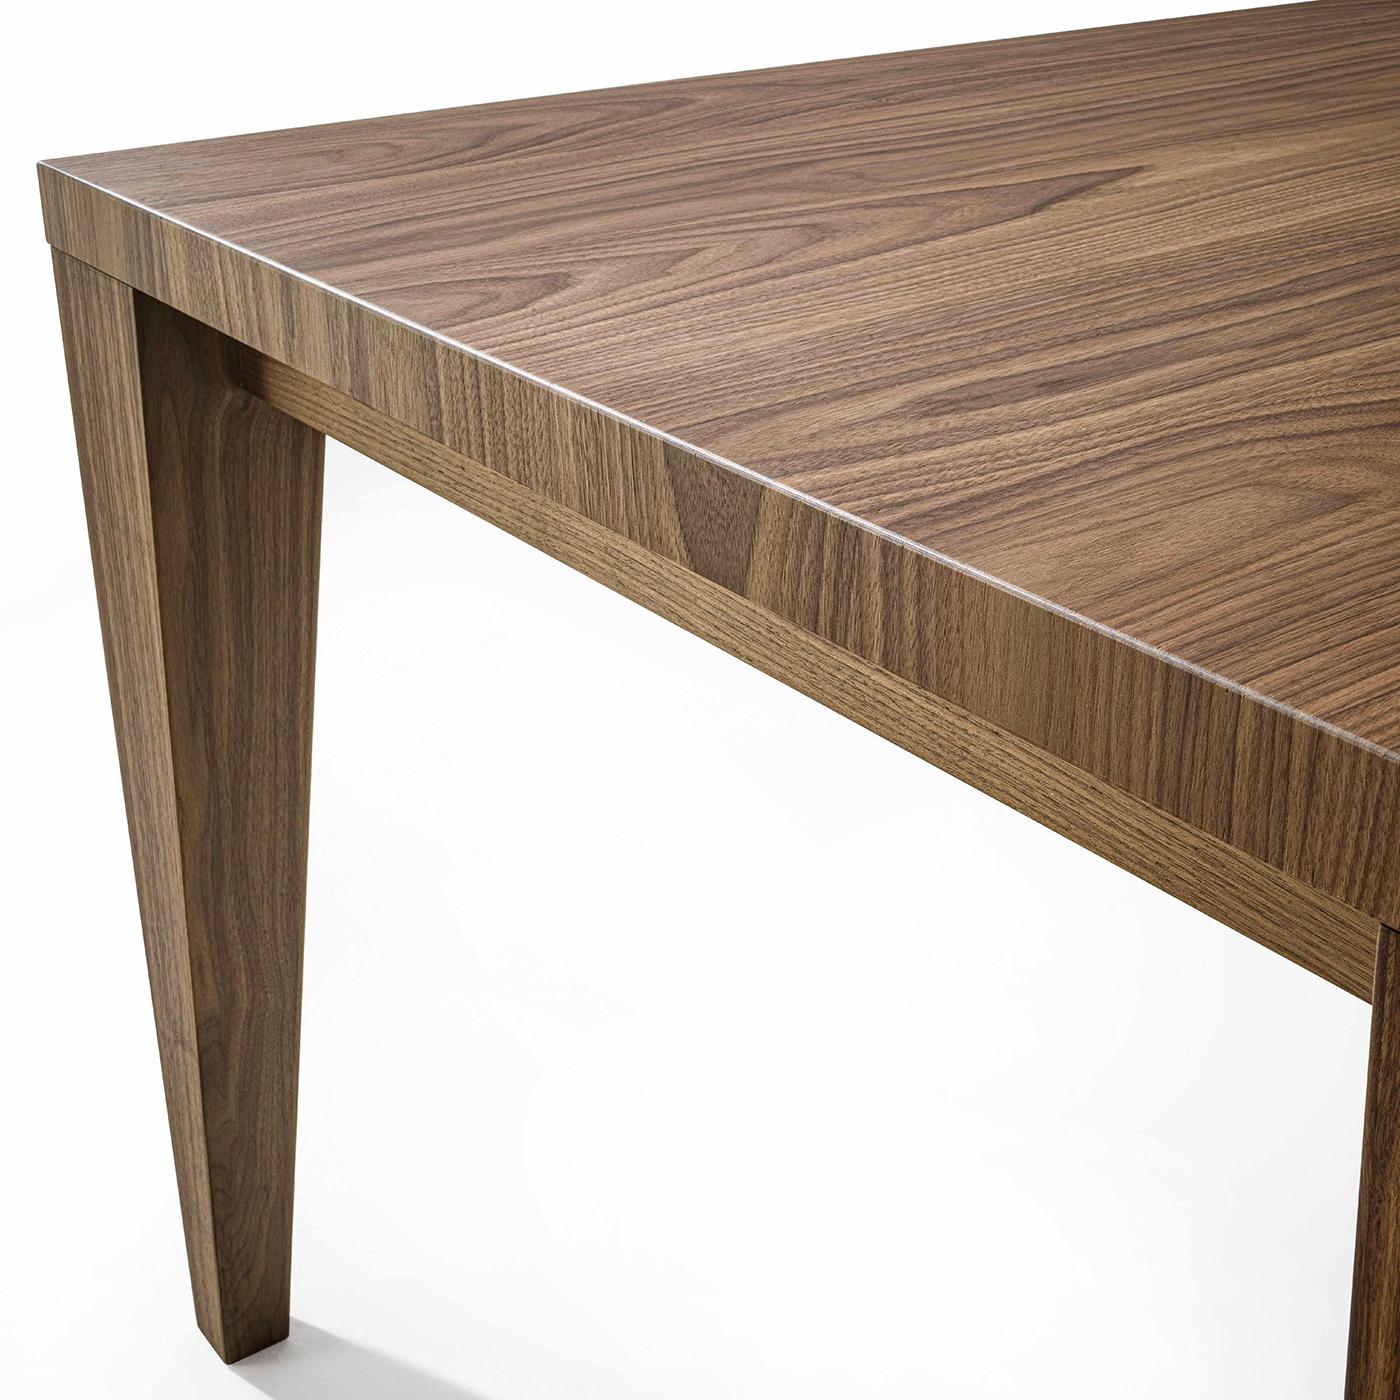 Prized Canaletto walnut with its intriguing, warm, and unpredictable traceries was chosen to counterbalance the unadorned design of this dining table. Distinguished by solid tapered legs emphasizing its sharp lines, it will effortlessly complement a